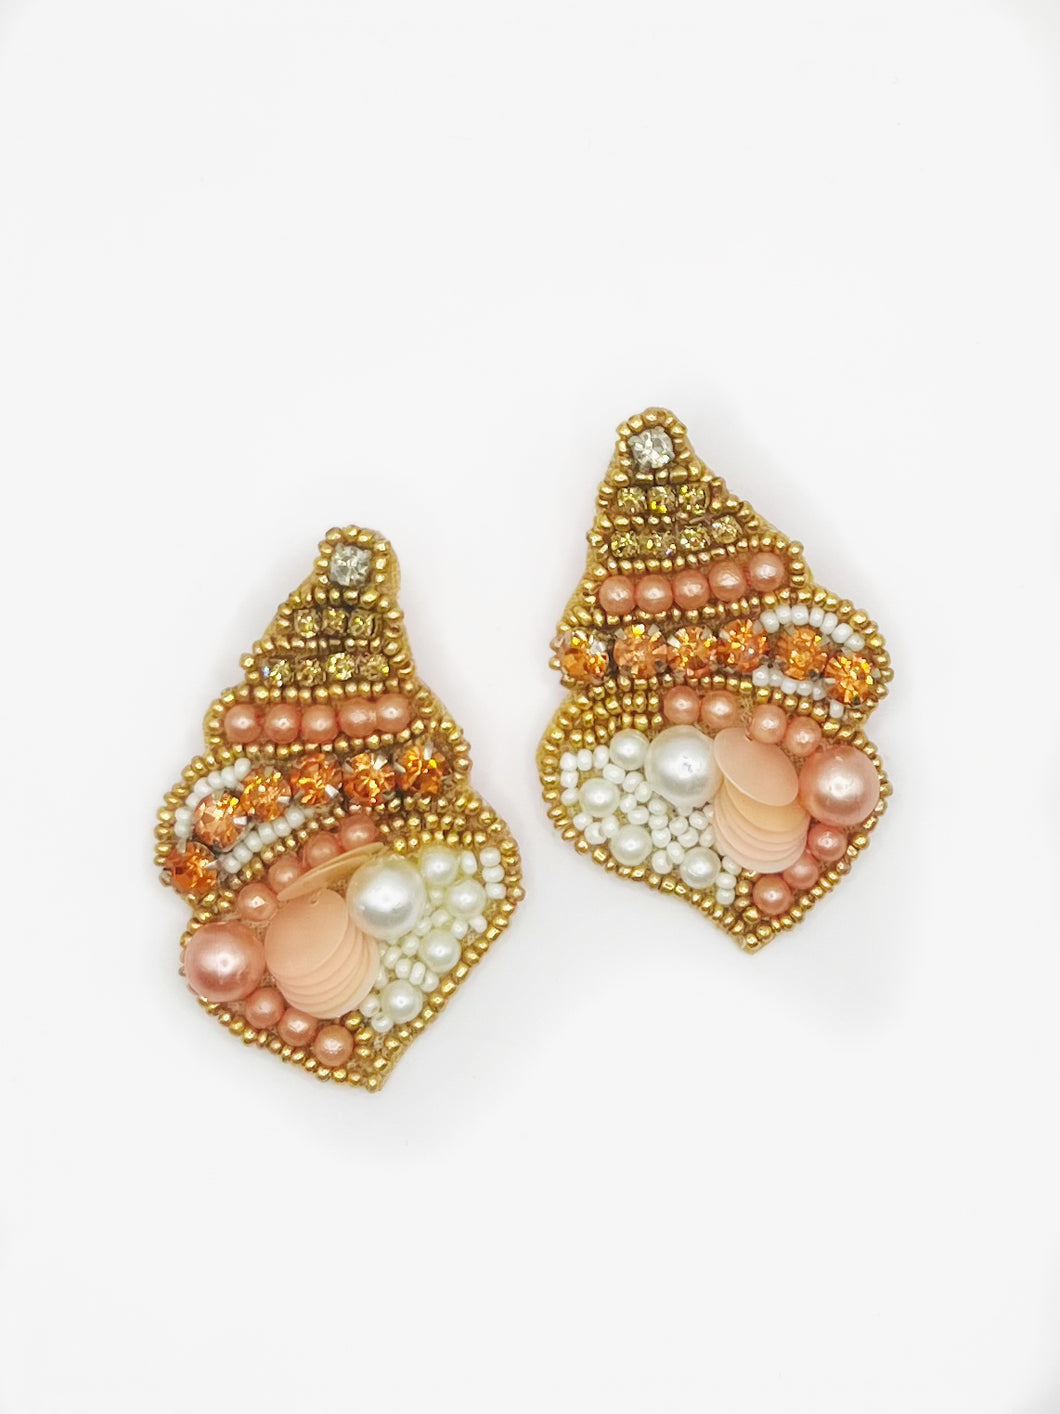 Pink Sea Shell Beaded Statement Earrings/ ocean/ beach/ holiday/ cruise/ pearls/ conch shell